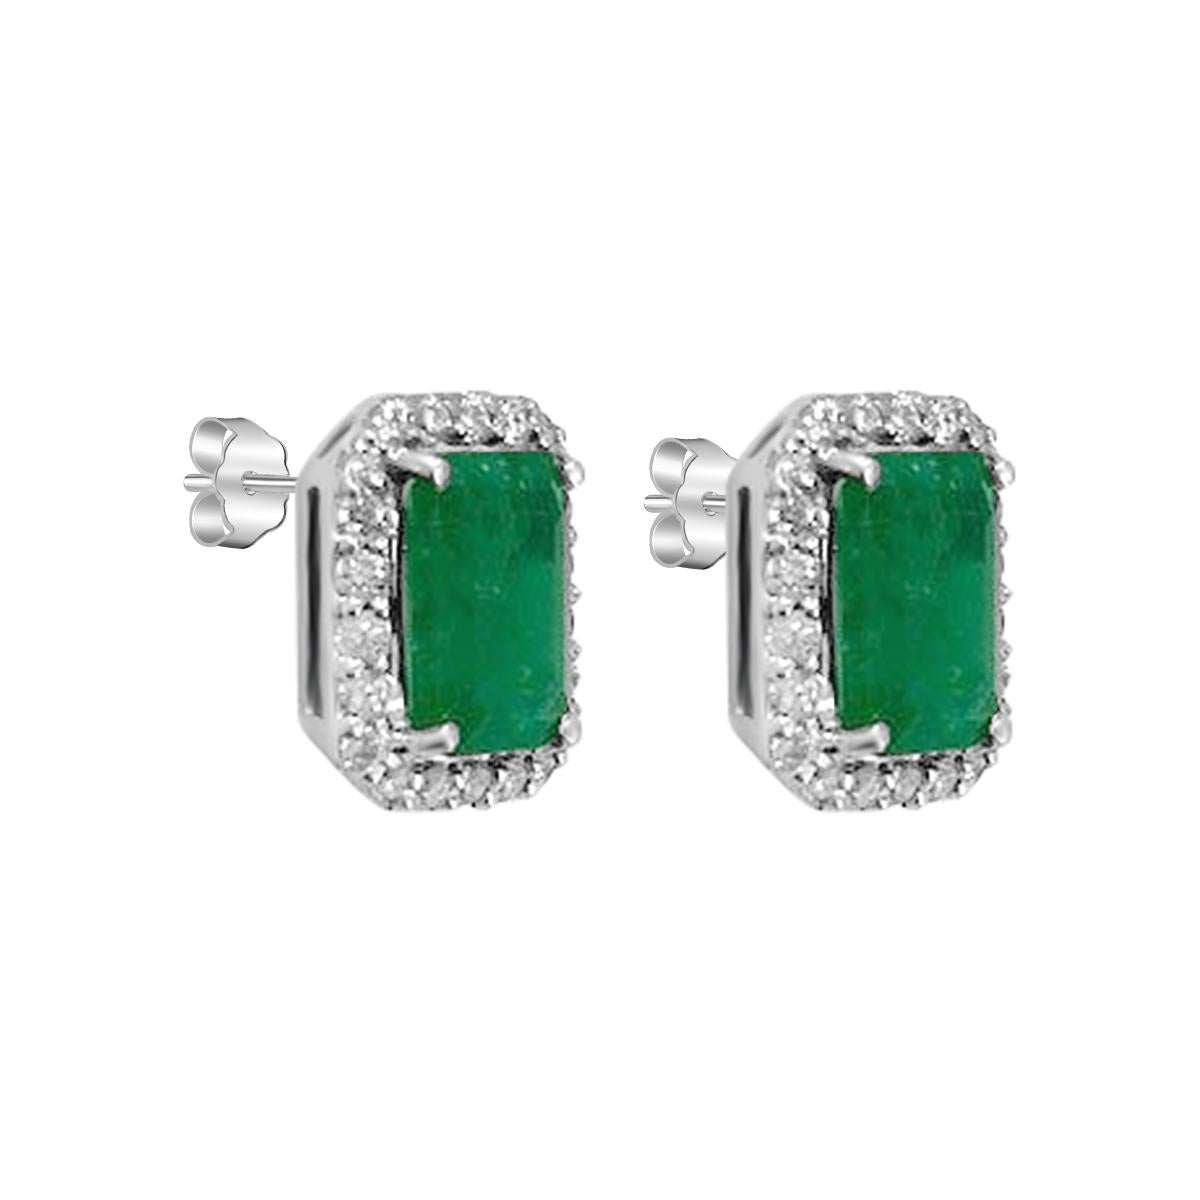 Modern 14K White Gold 1.67cts Emerald and Diamond Earring. Style# TS1117E